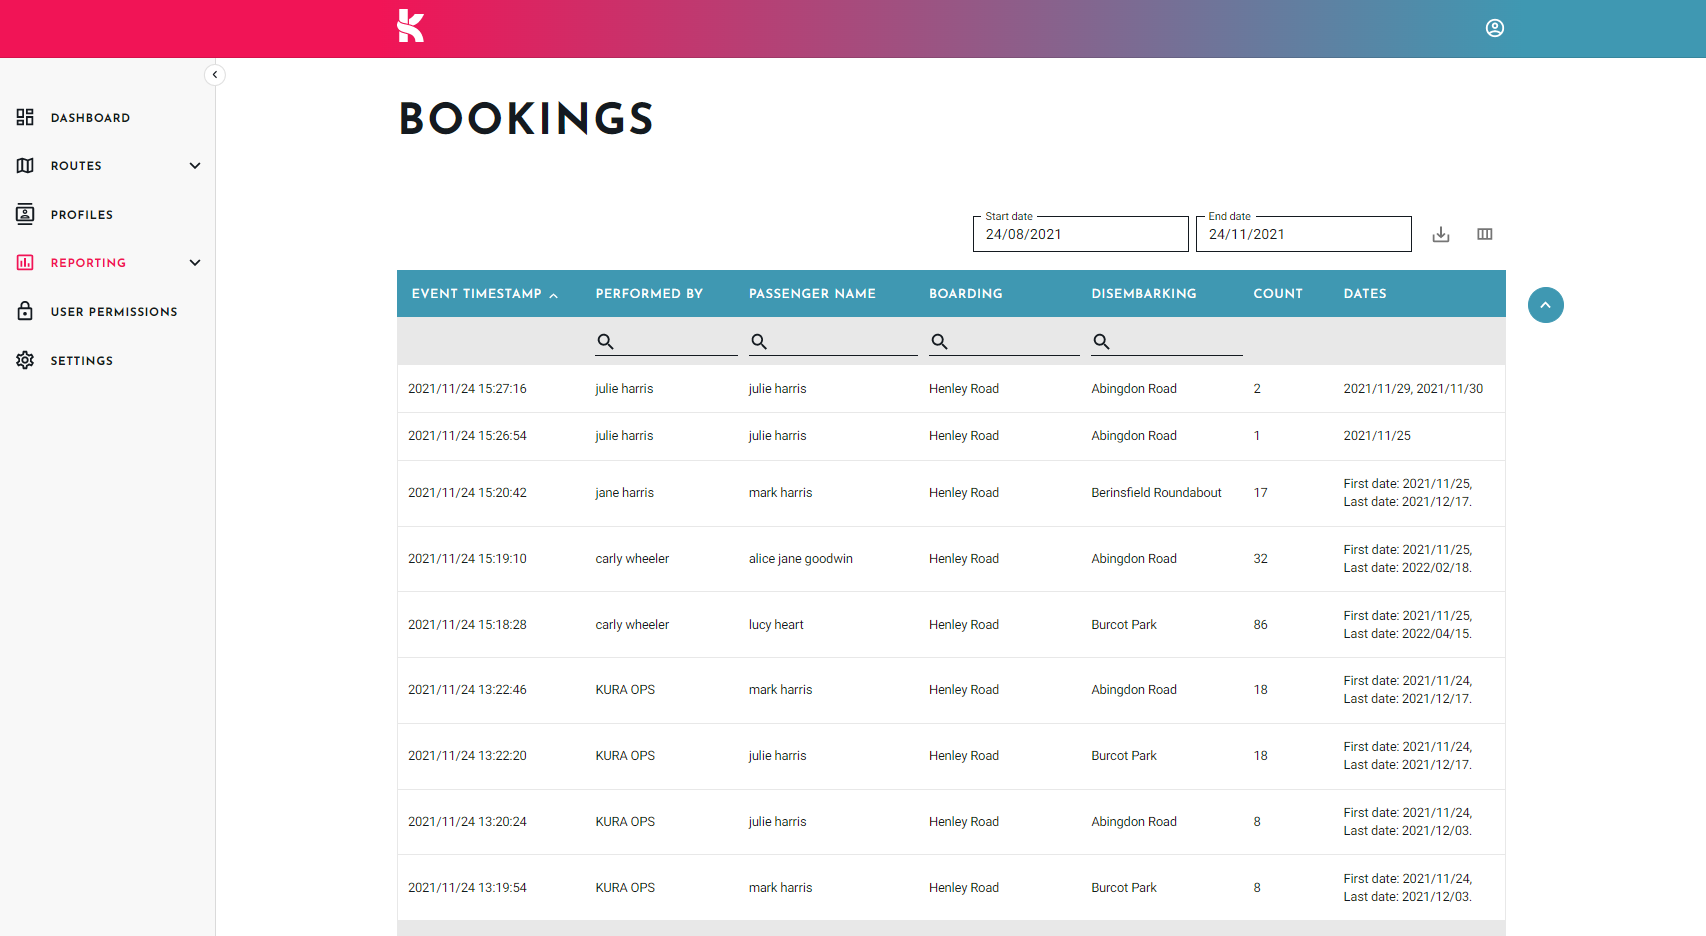 Bookings_table.png